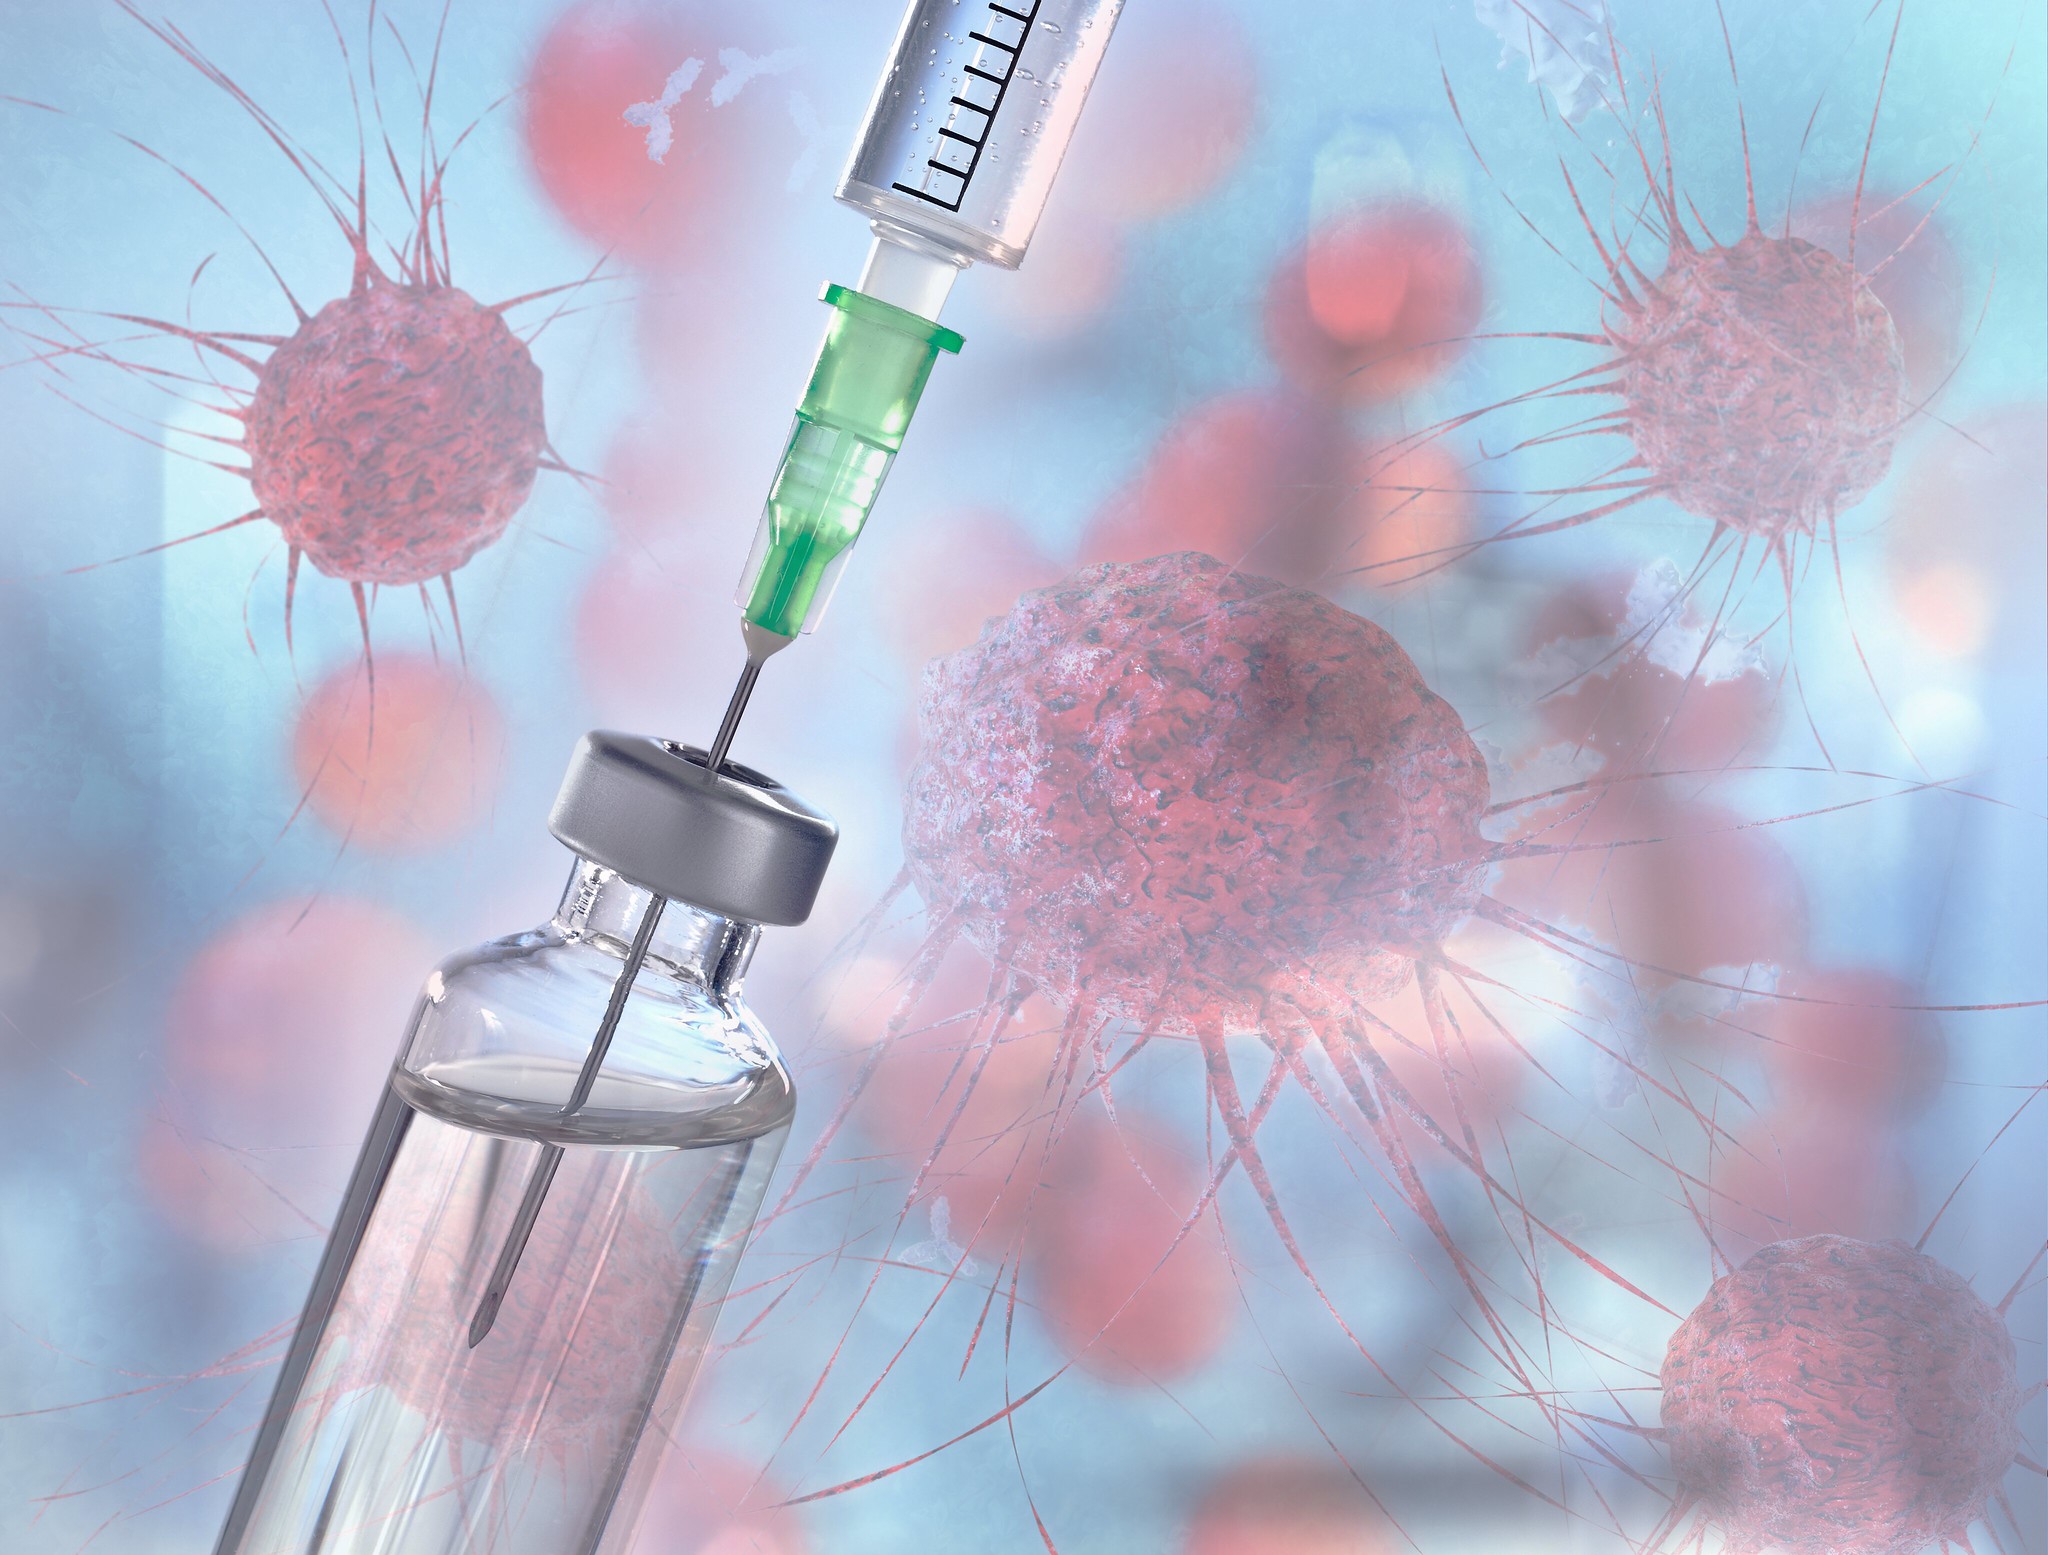 what are the next steps for cancer treatment vaccines?